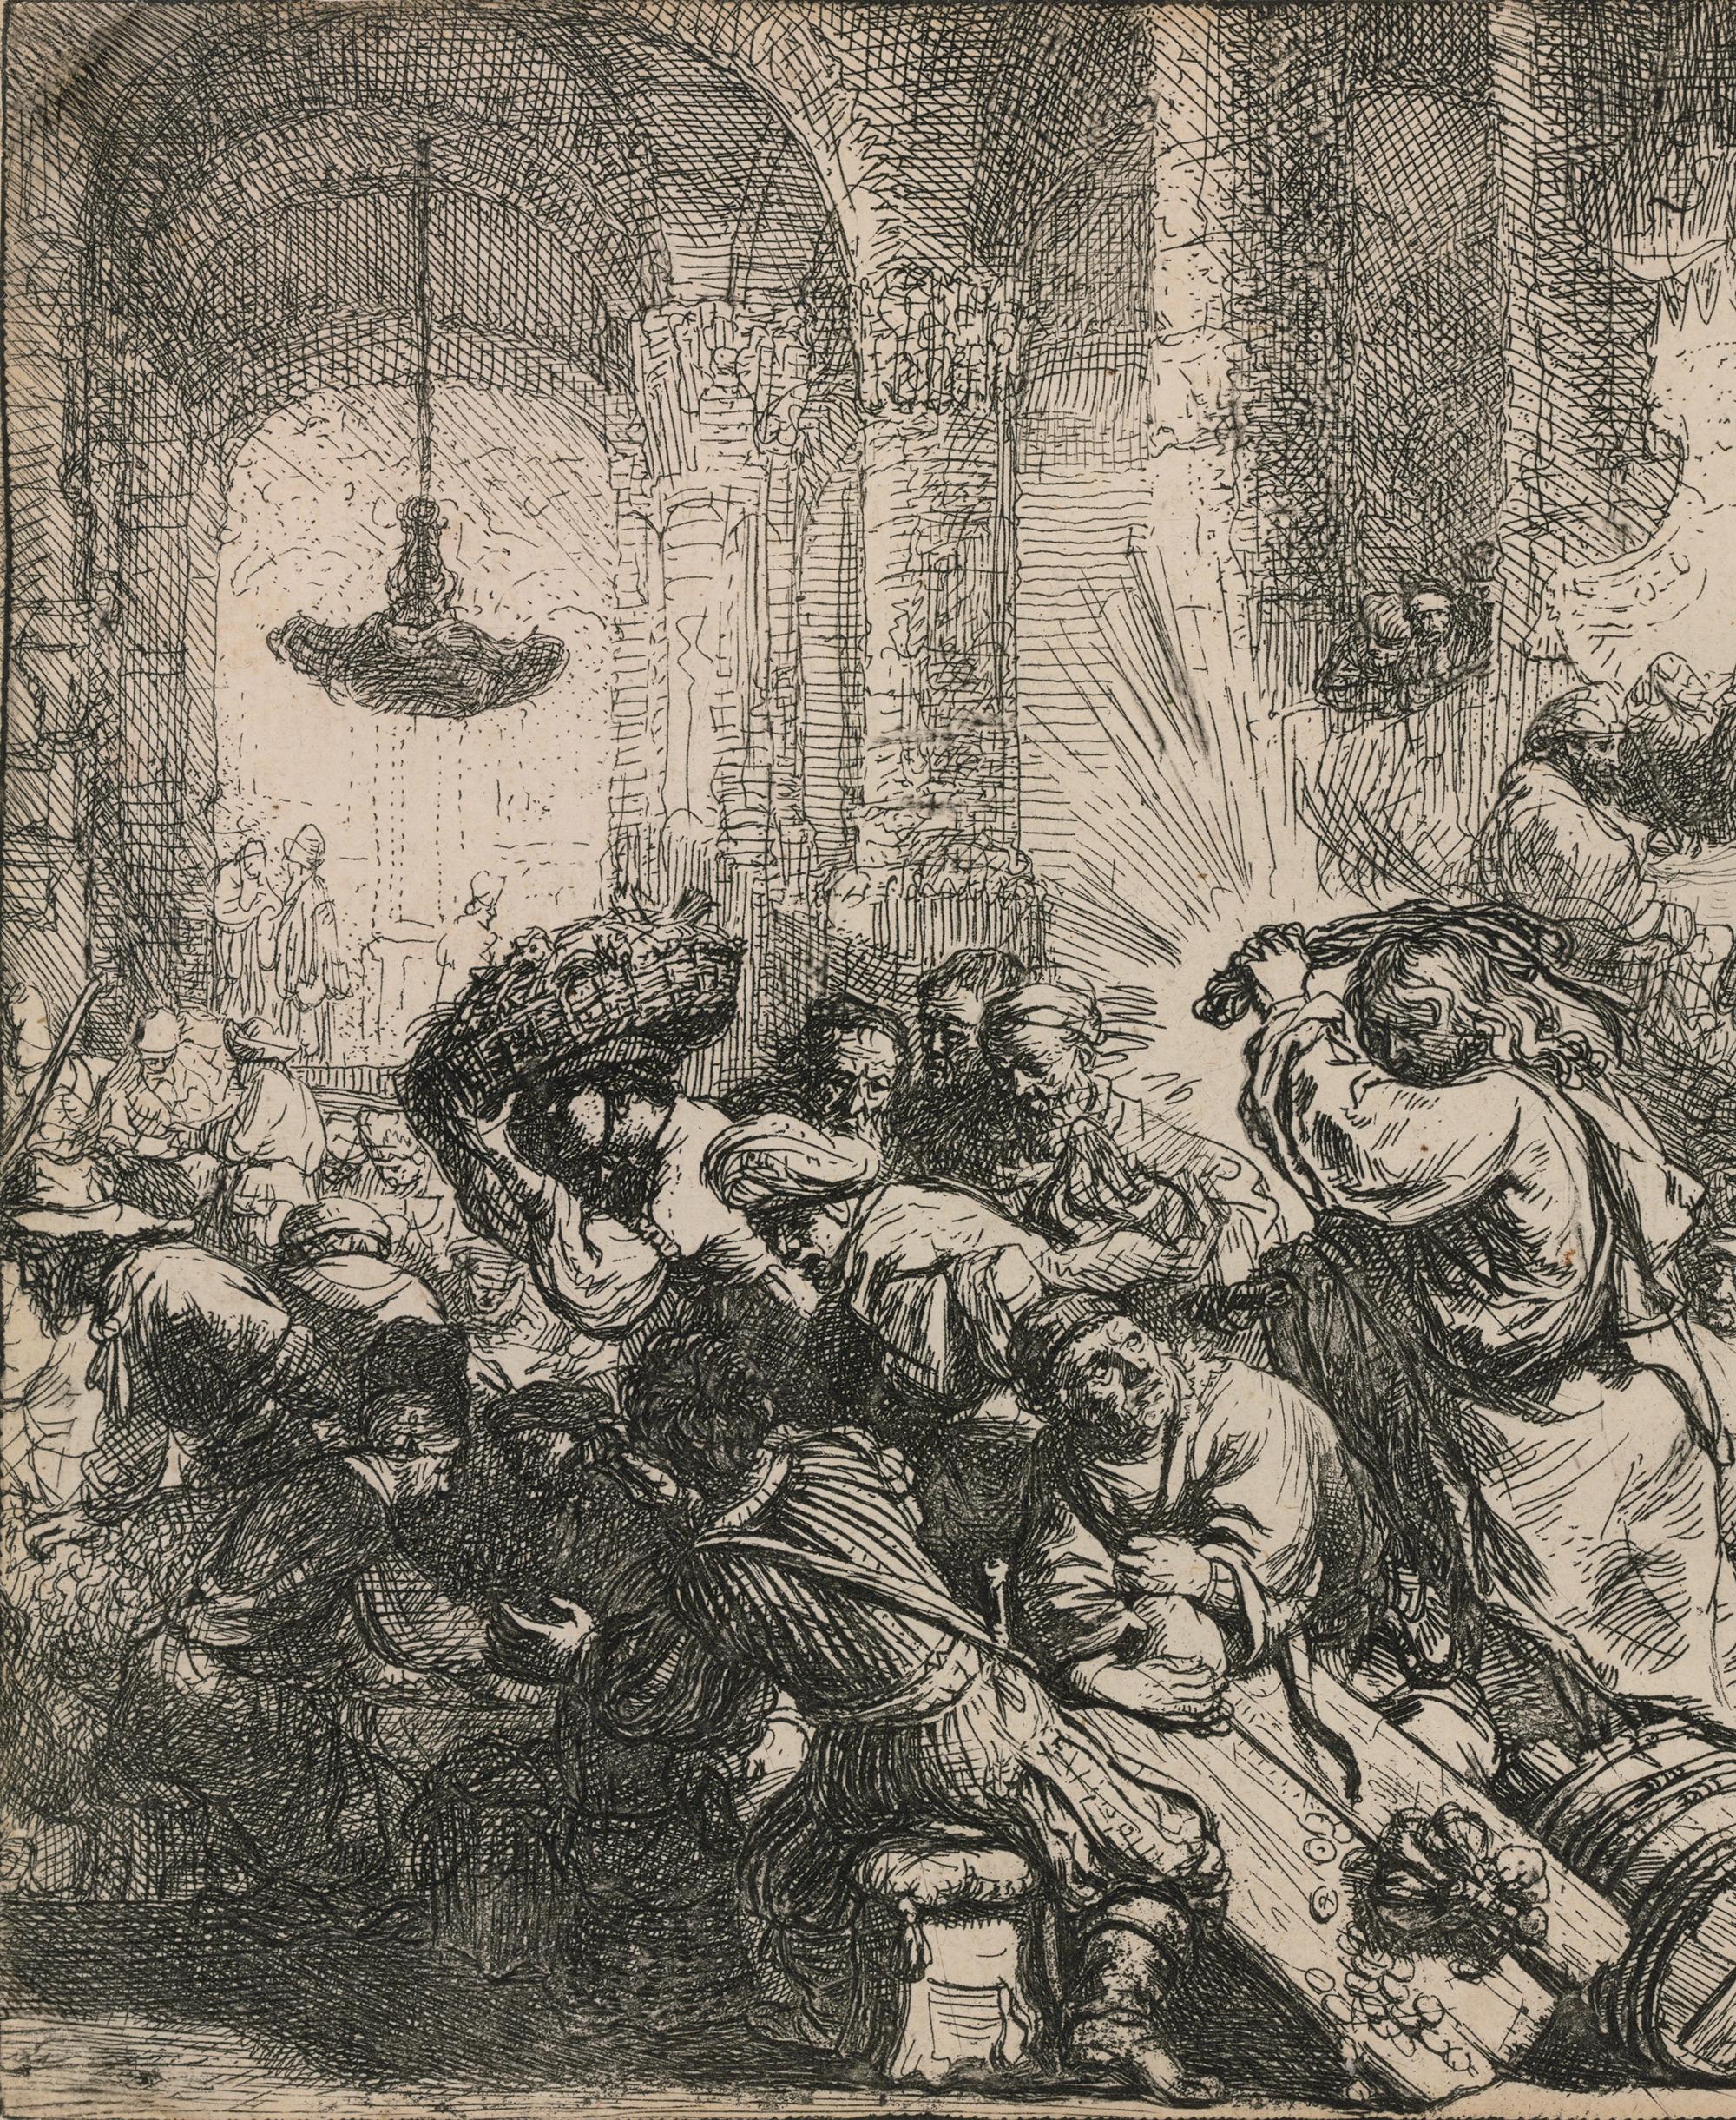 Christ Driving The Money Changers From The Temple By Rembrandt Van Rijn - Old Masters Art by Rembrandt van Rijn